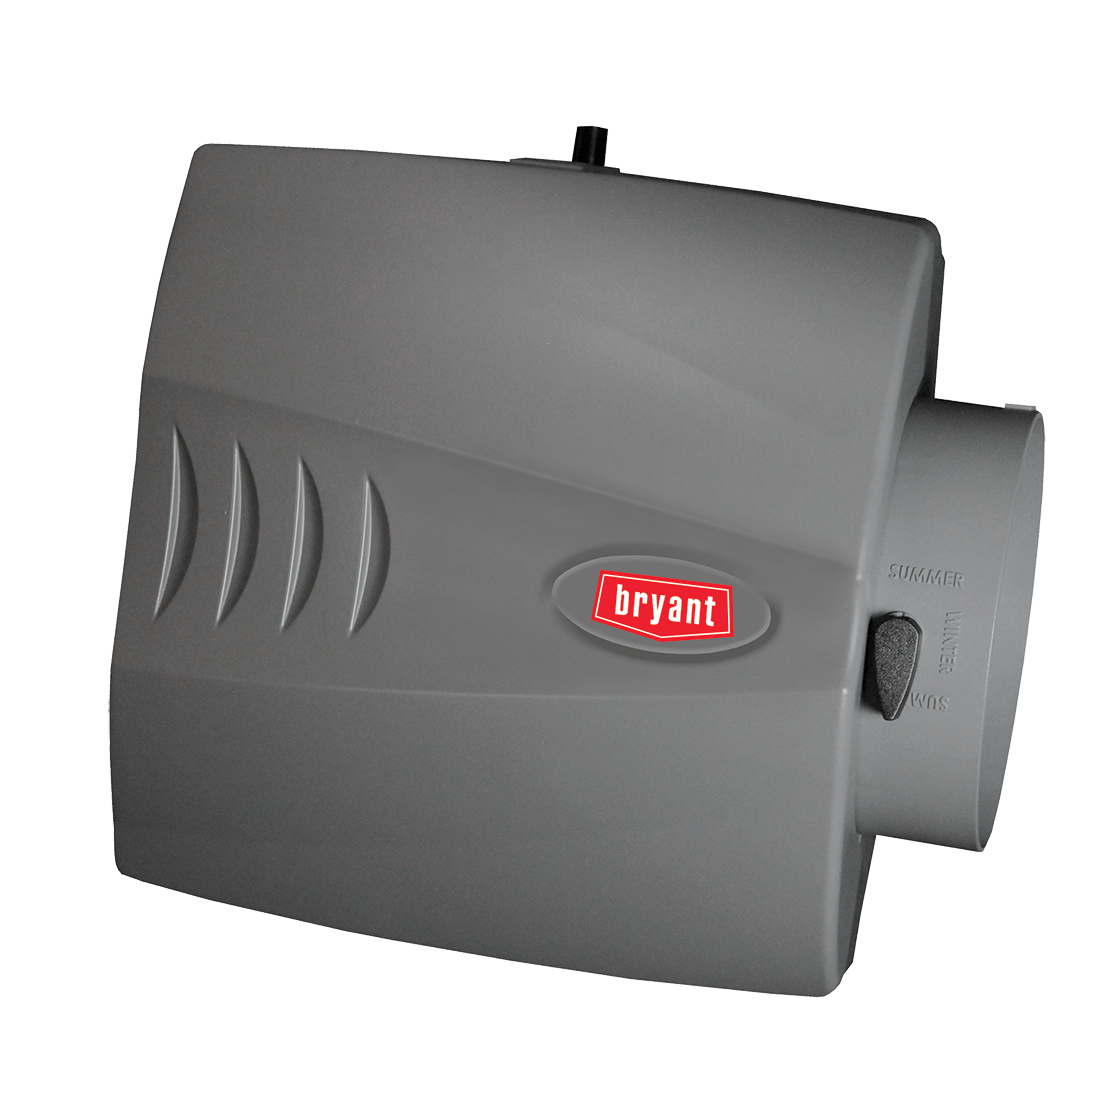 Preferred™ Series Small Bypass Humidifier HUMBBSBP — Hamtramck, MI — A & E Heating & Cooling